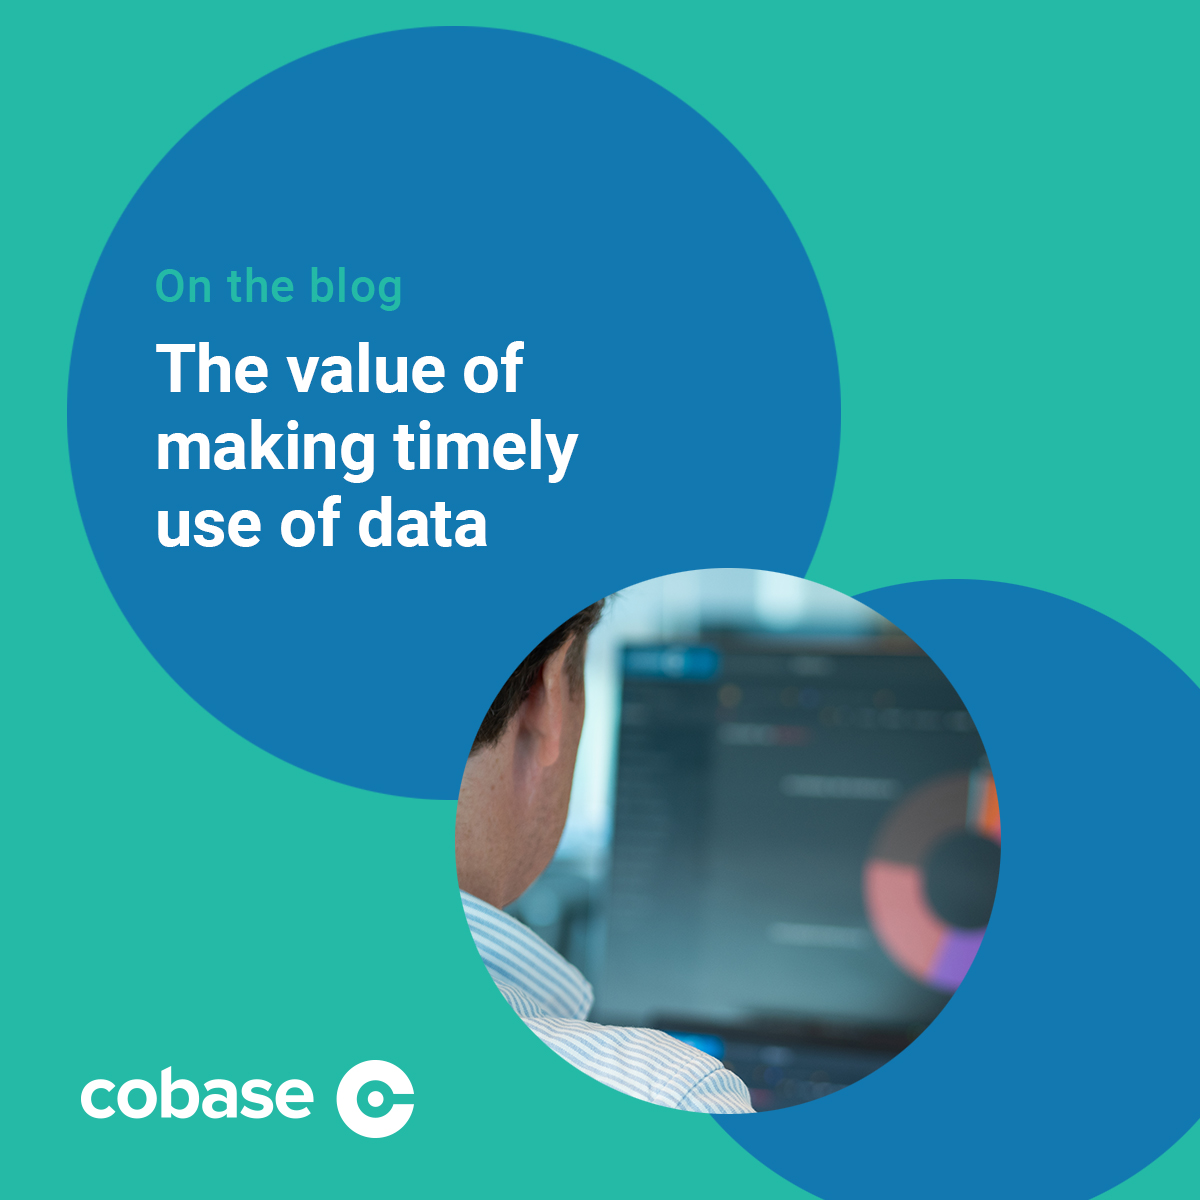 The value of making timely use of data